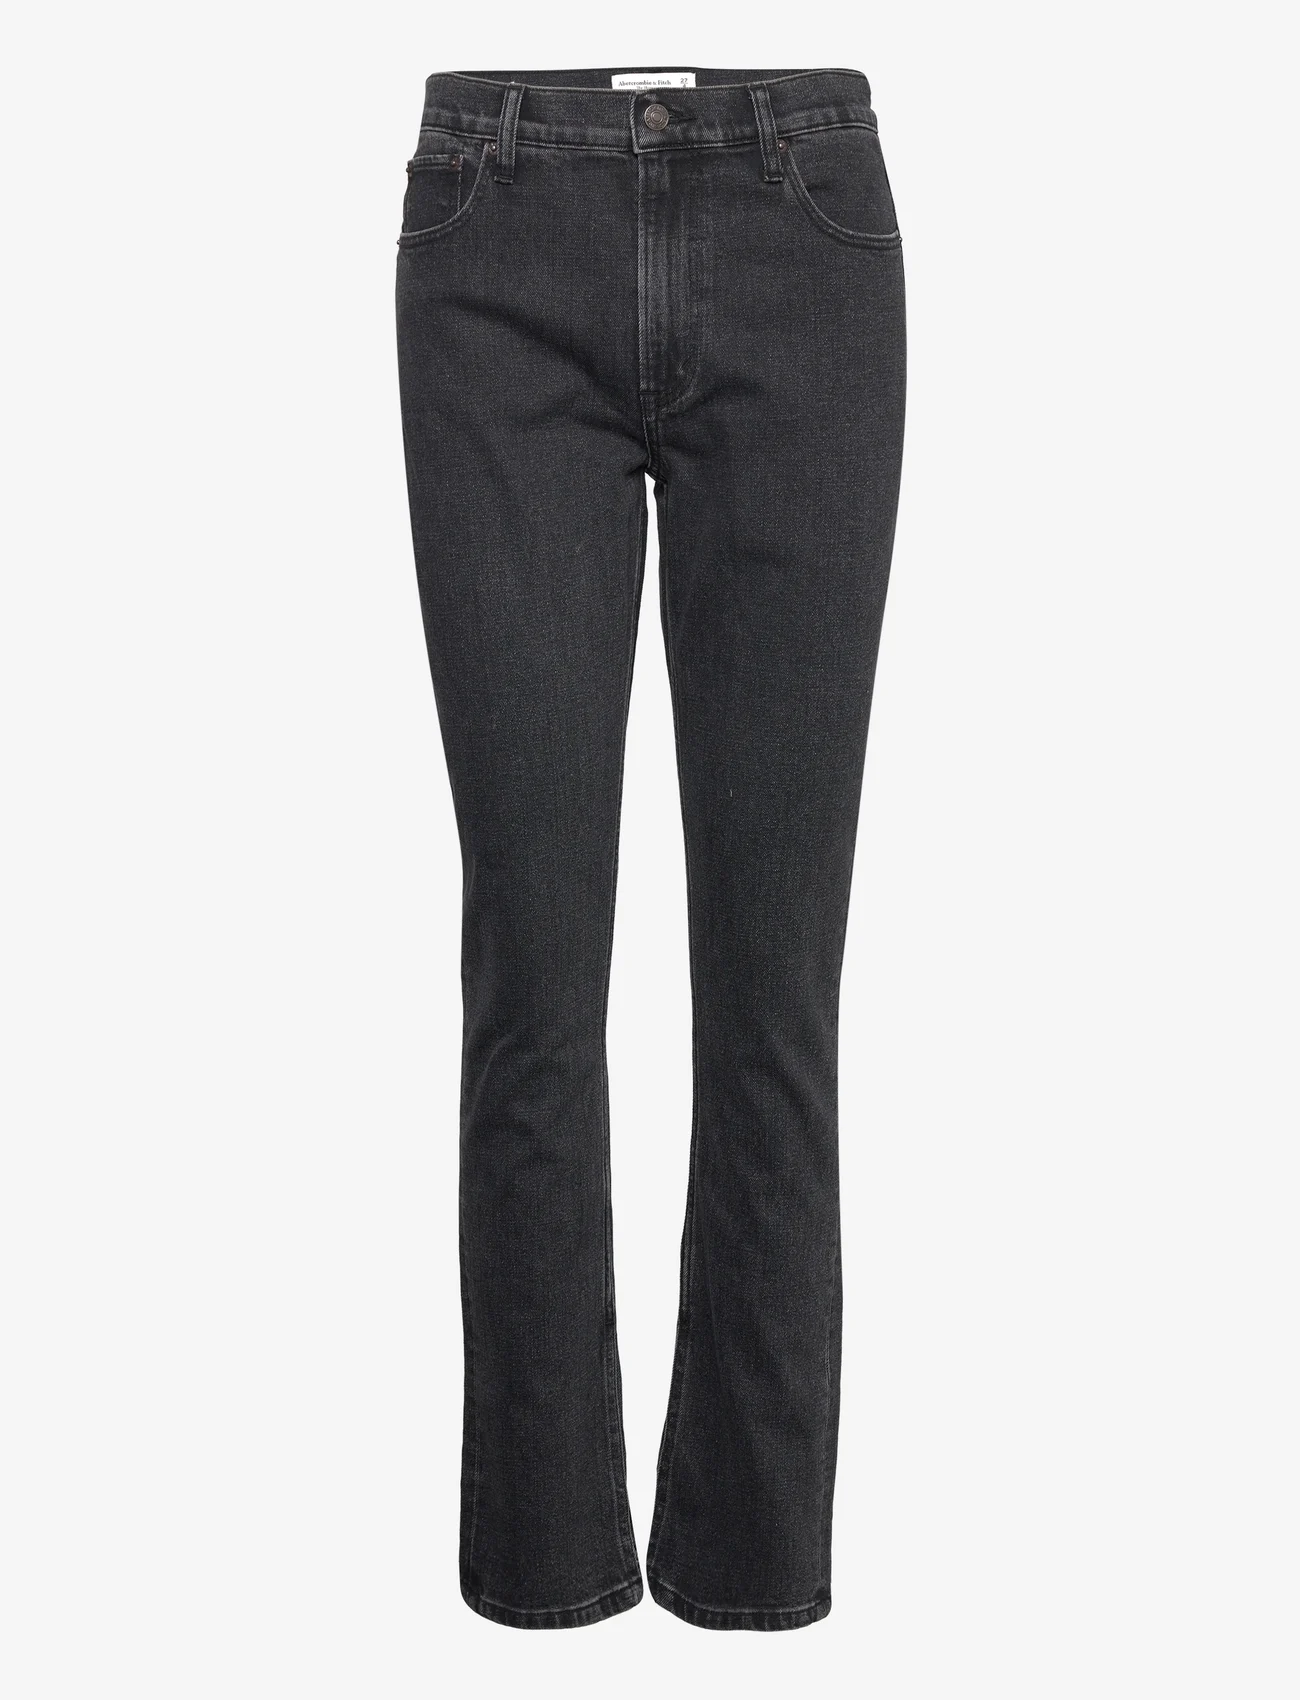 Abercrombie & Fitch - ANF WOMENS JEANS - slim fit jeans - black - 0